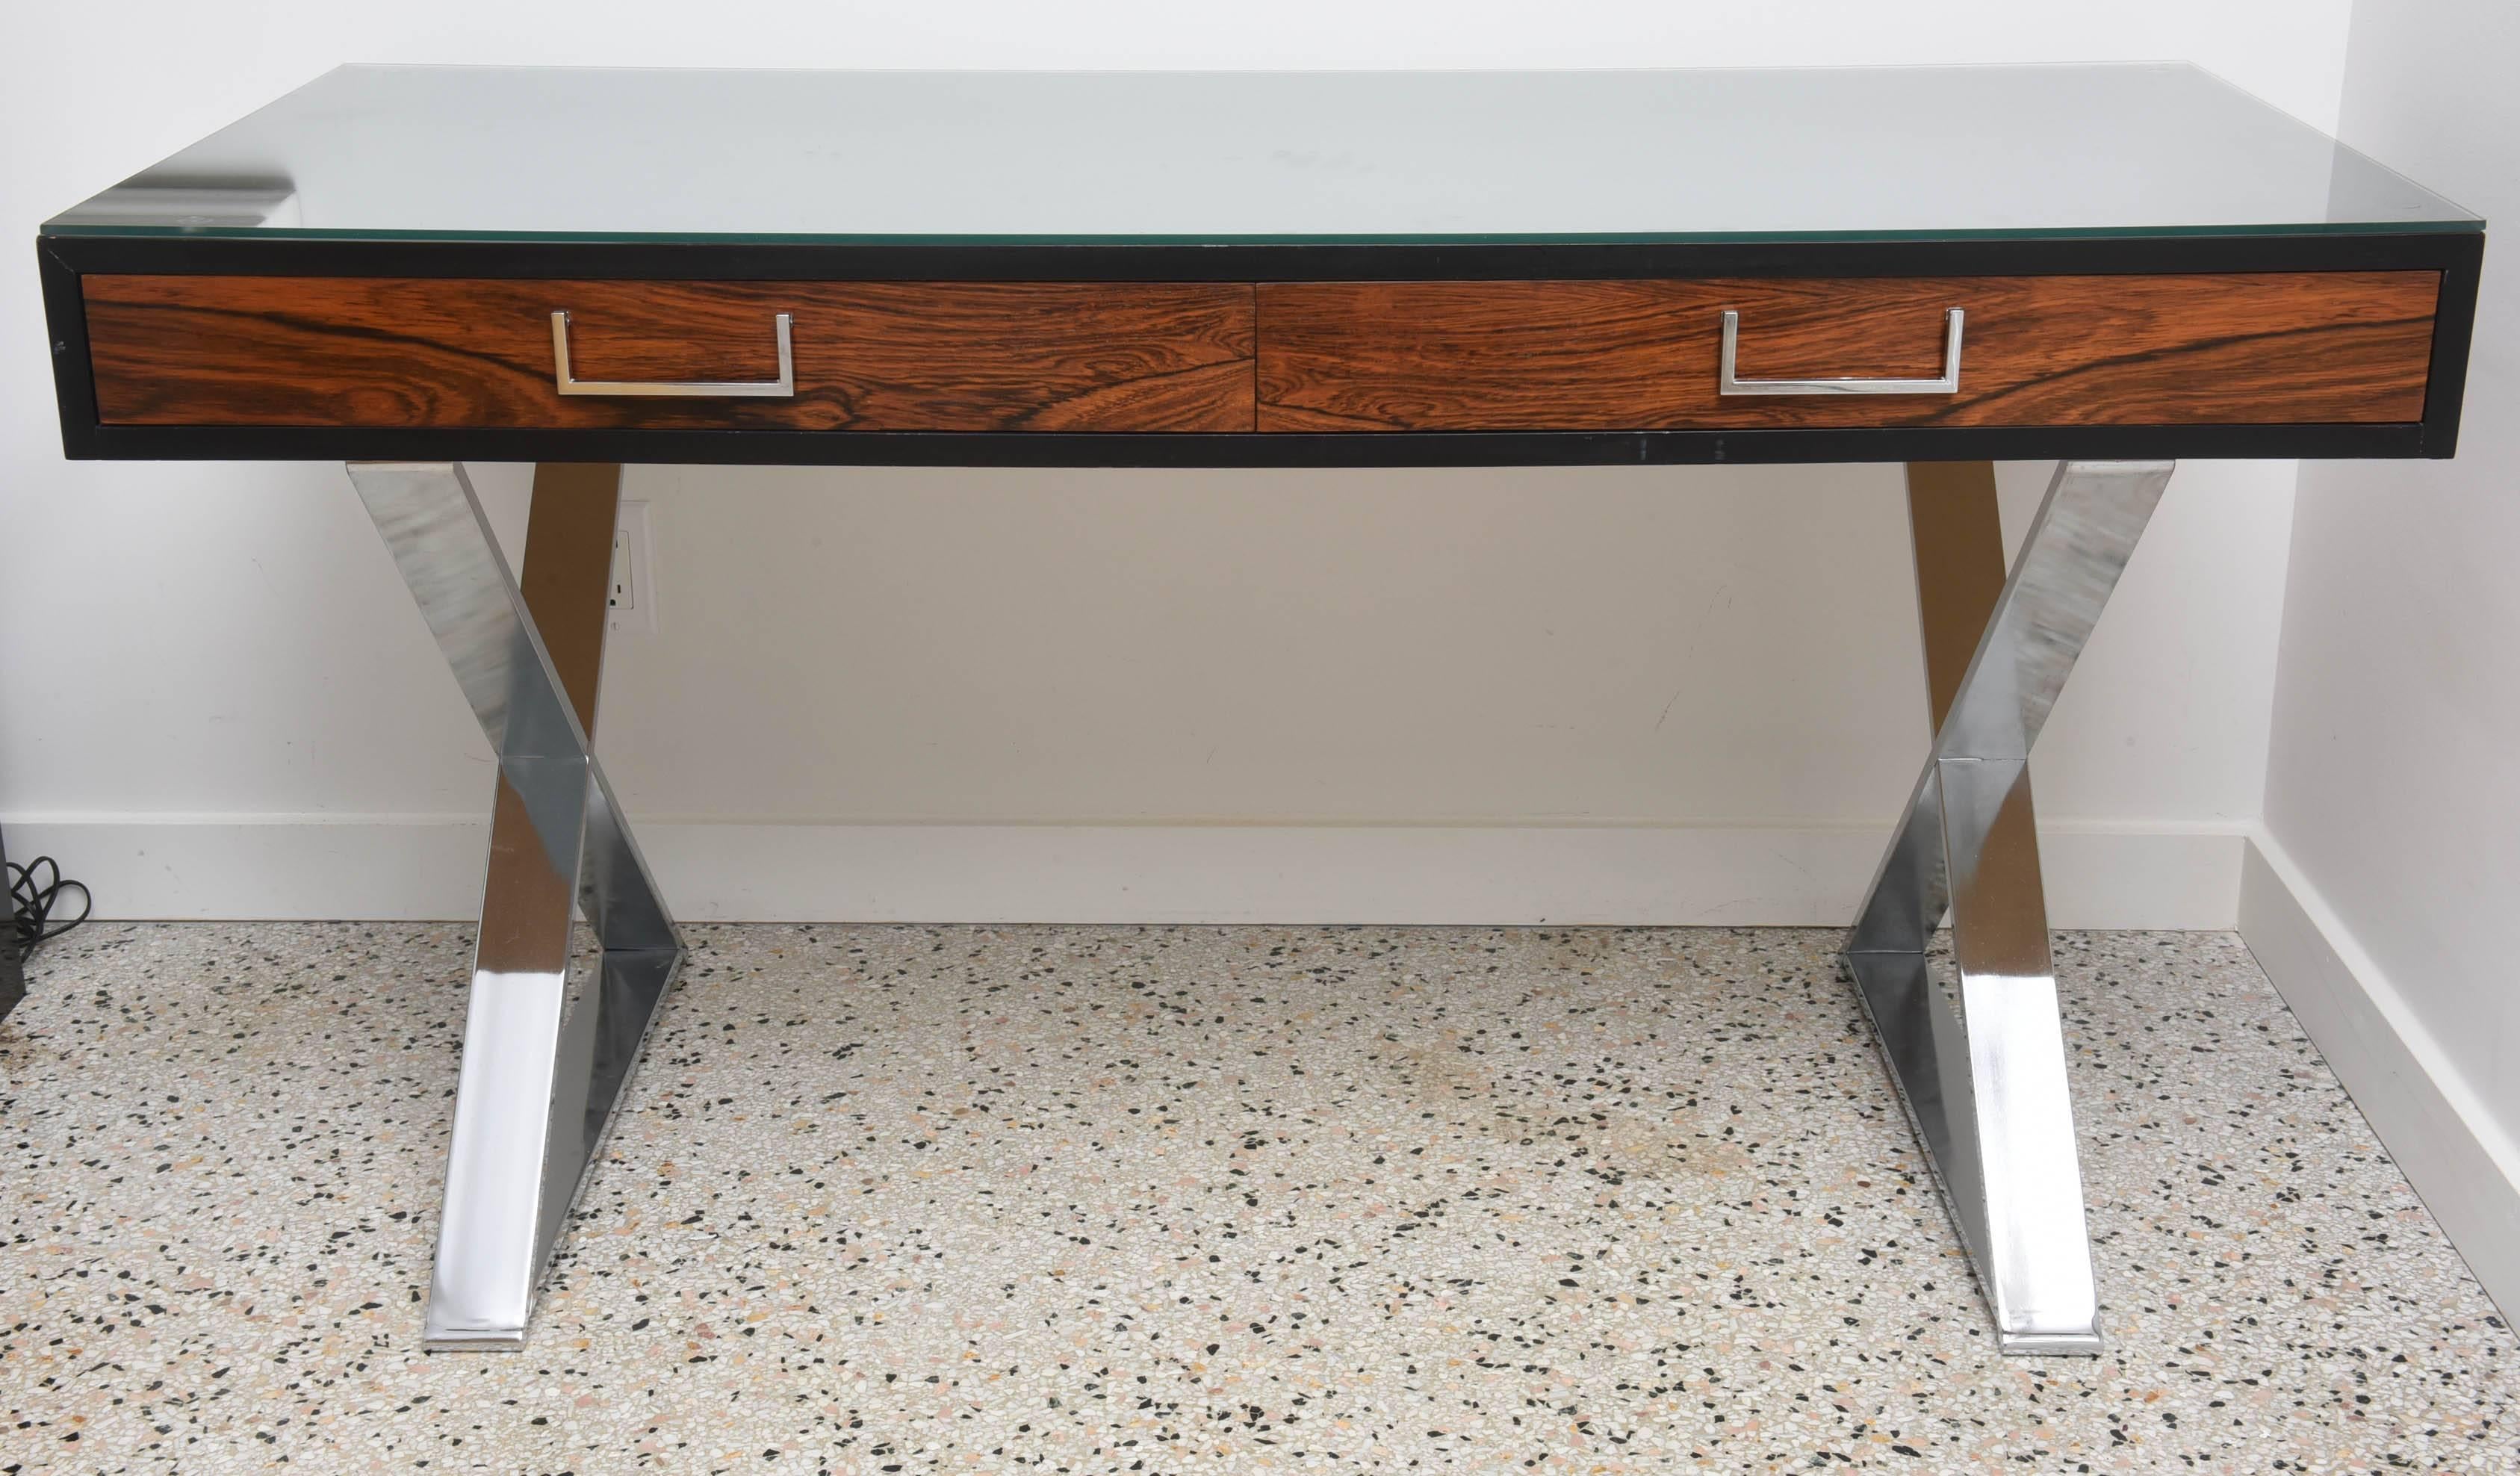 This handsome desk was designed by the iconic furniture designer Milo Baughman in the 1970s. Baughman has taken the traditional Campaign style and recreated it with modern materials and finishes.

The X-base is in polished steel and the main body